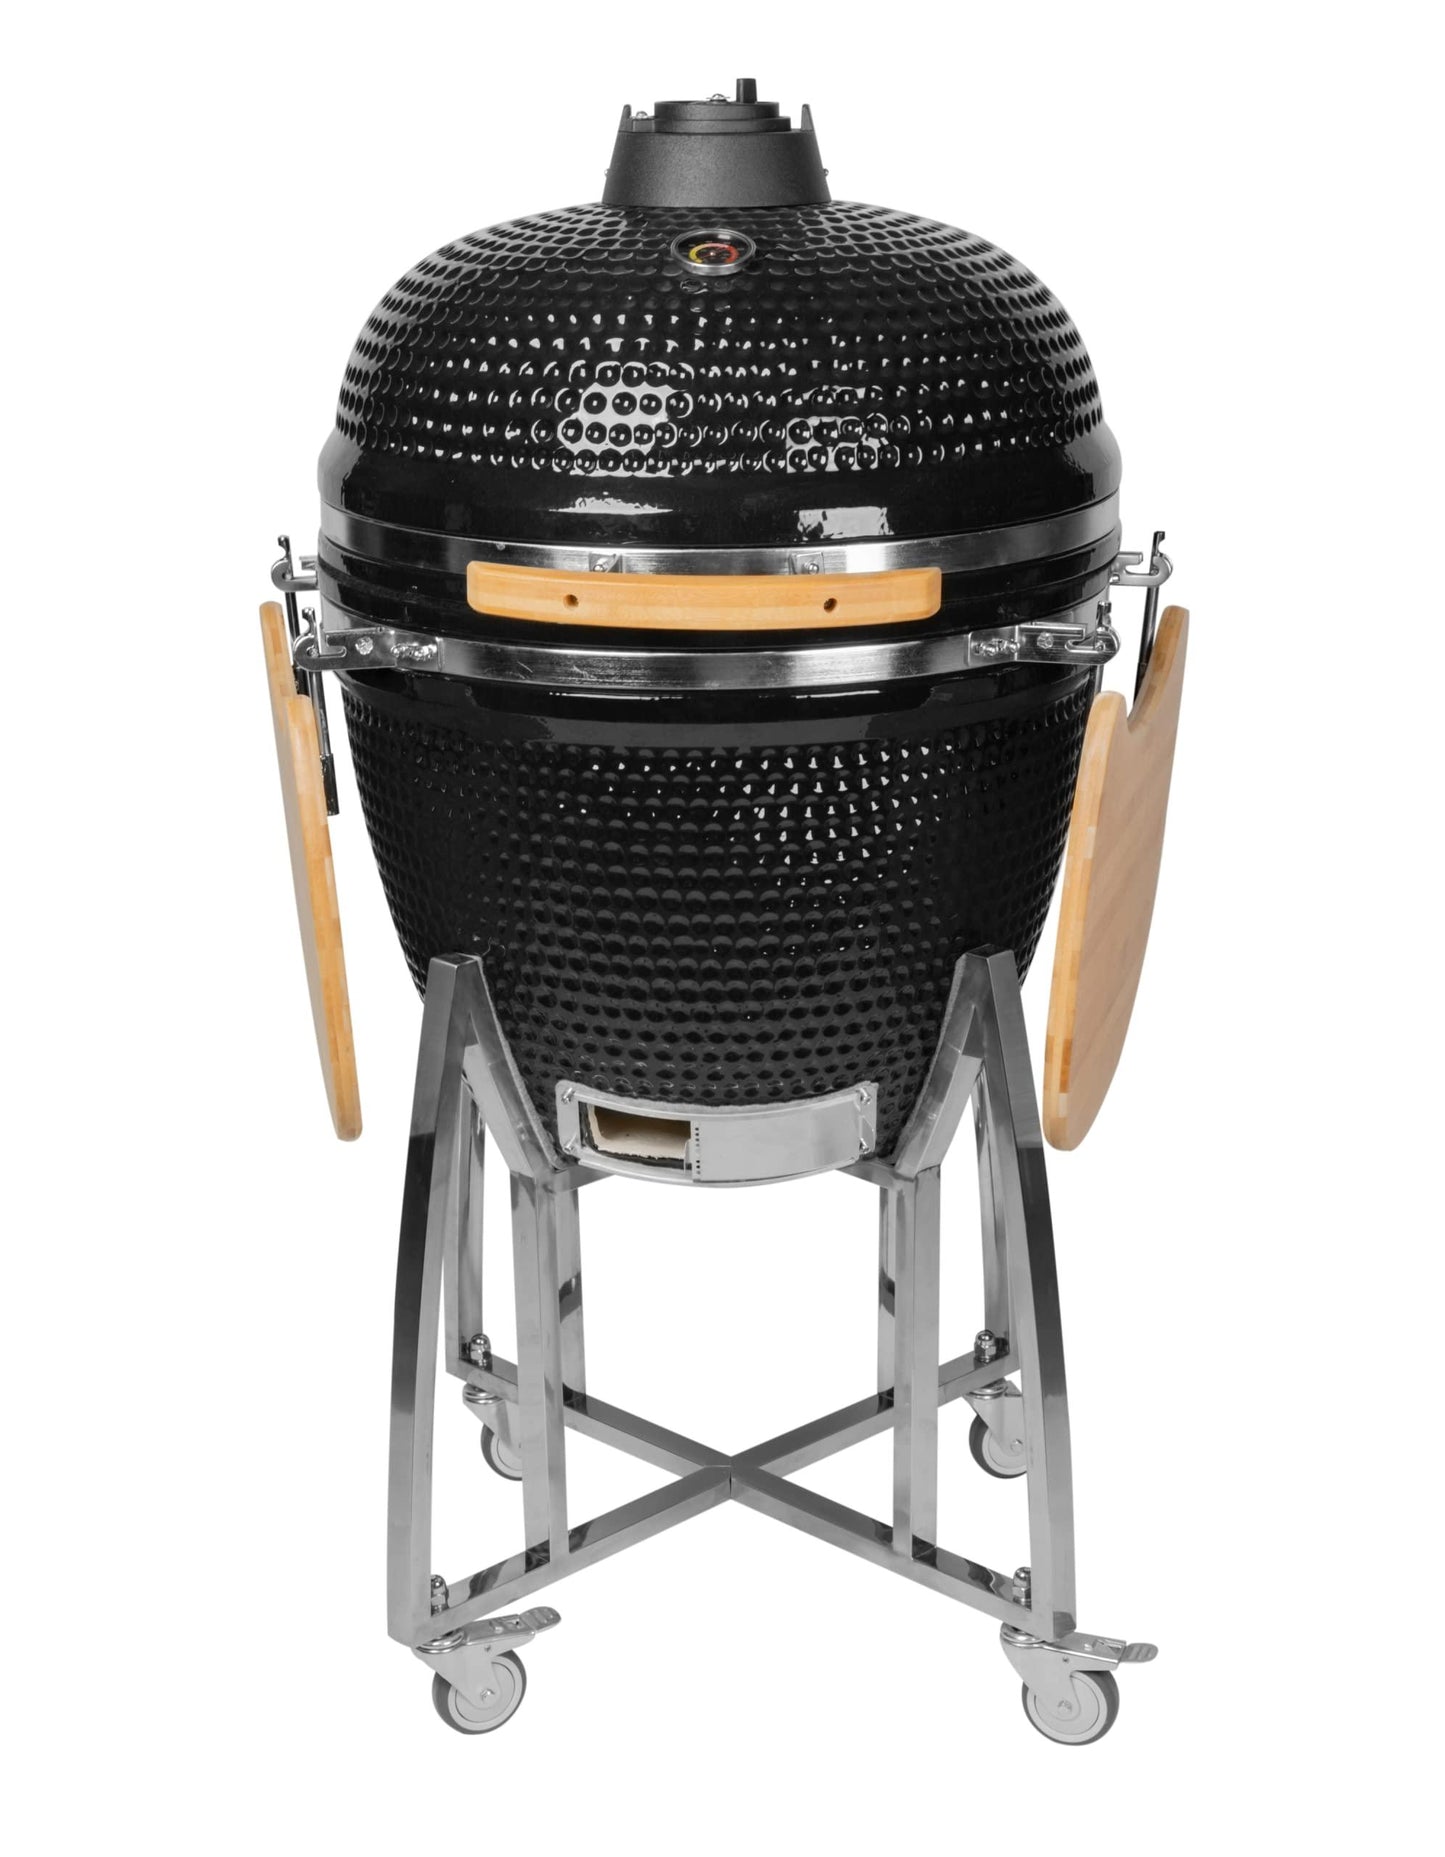 Humos - 23” ExtraLarge Ceramic Kamado, Grill Cooker + Oven + Smoker (With Trolley, Wheels and Cast Iron Vent) Cooking Area 305 Sq Inches, Black - CookCave